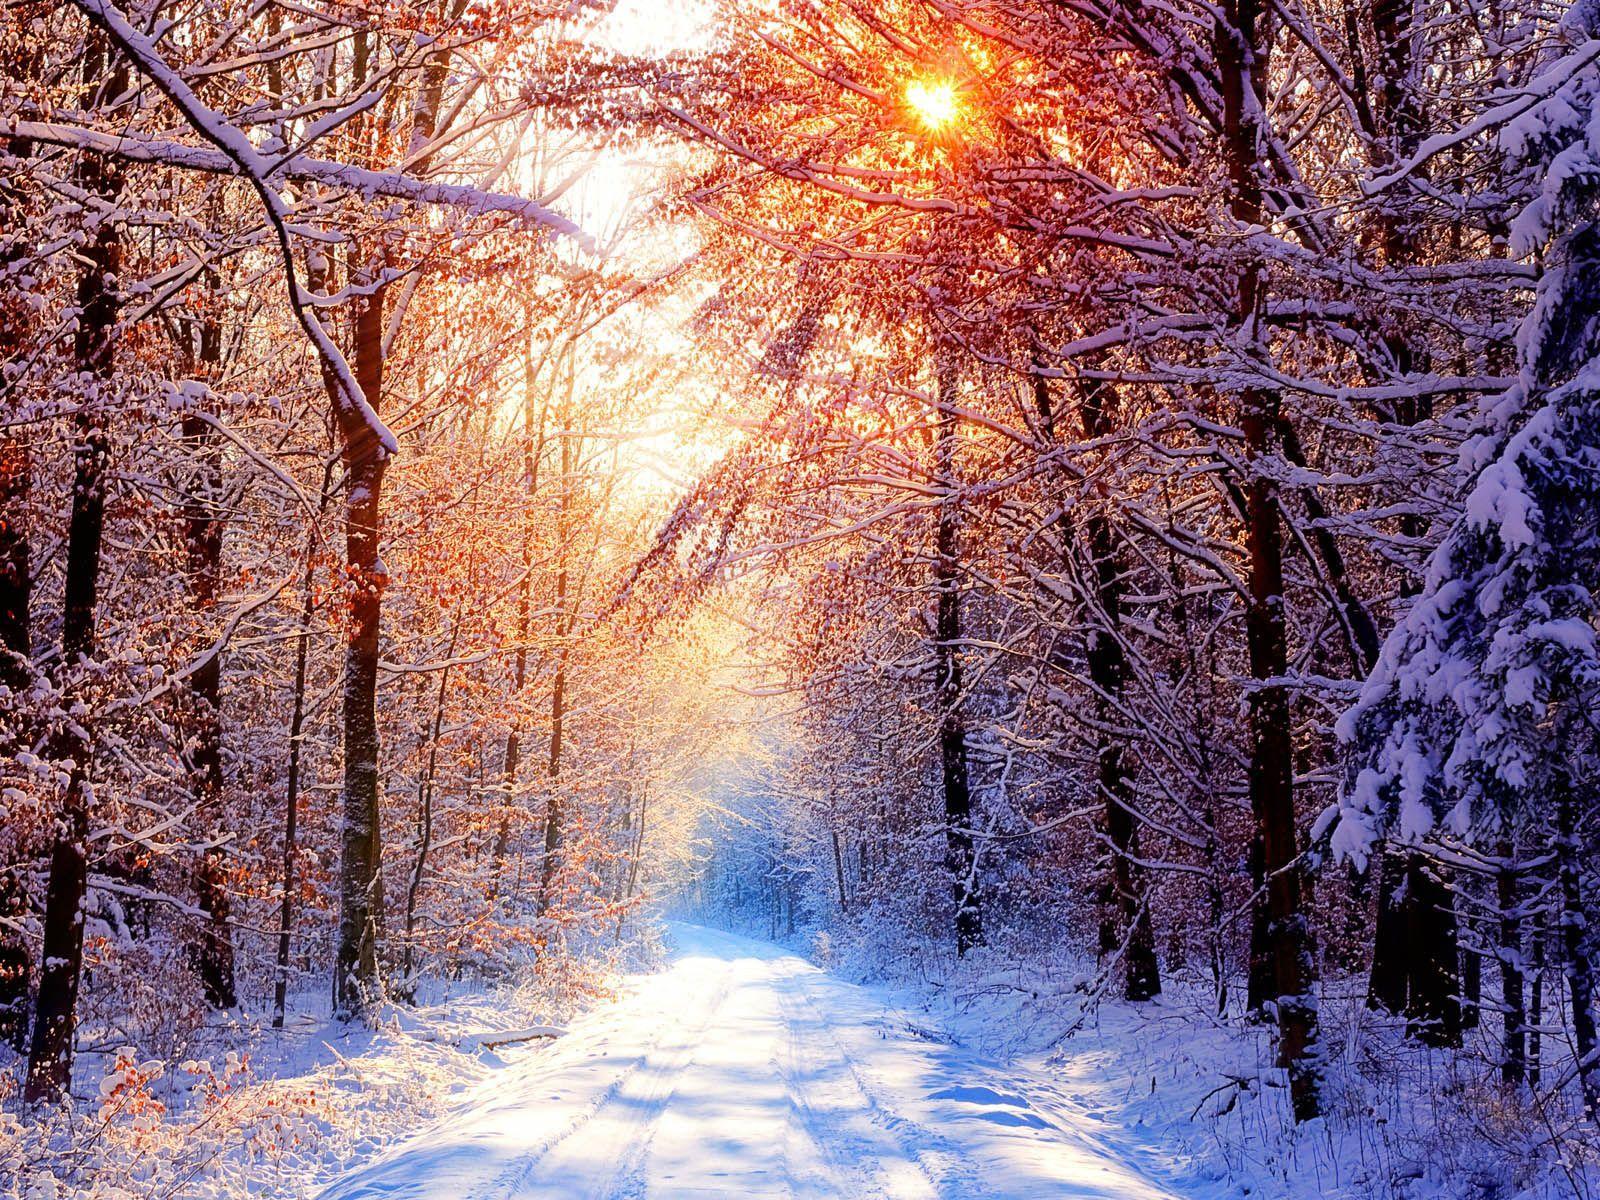 Snow Scene Wallpapers Free - Wallpaper Cave